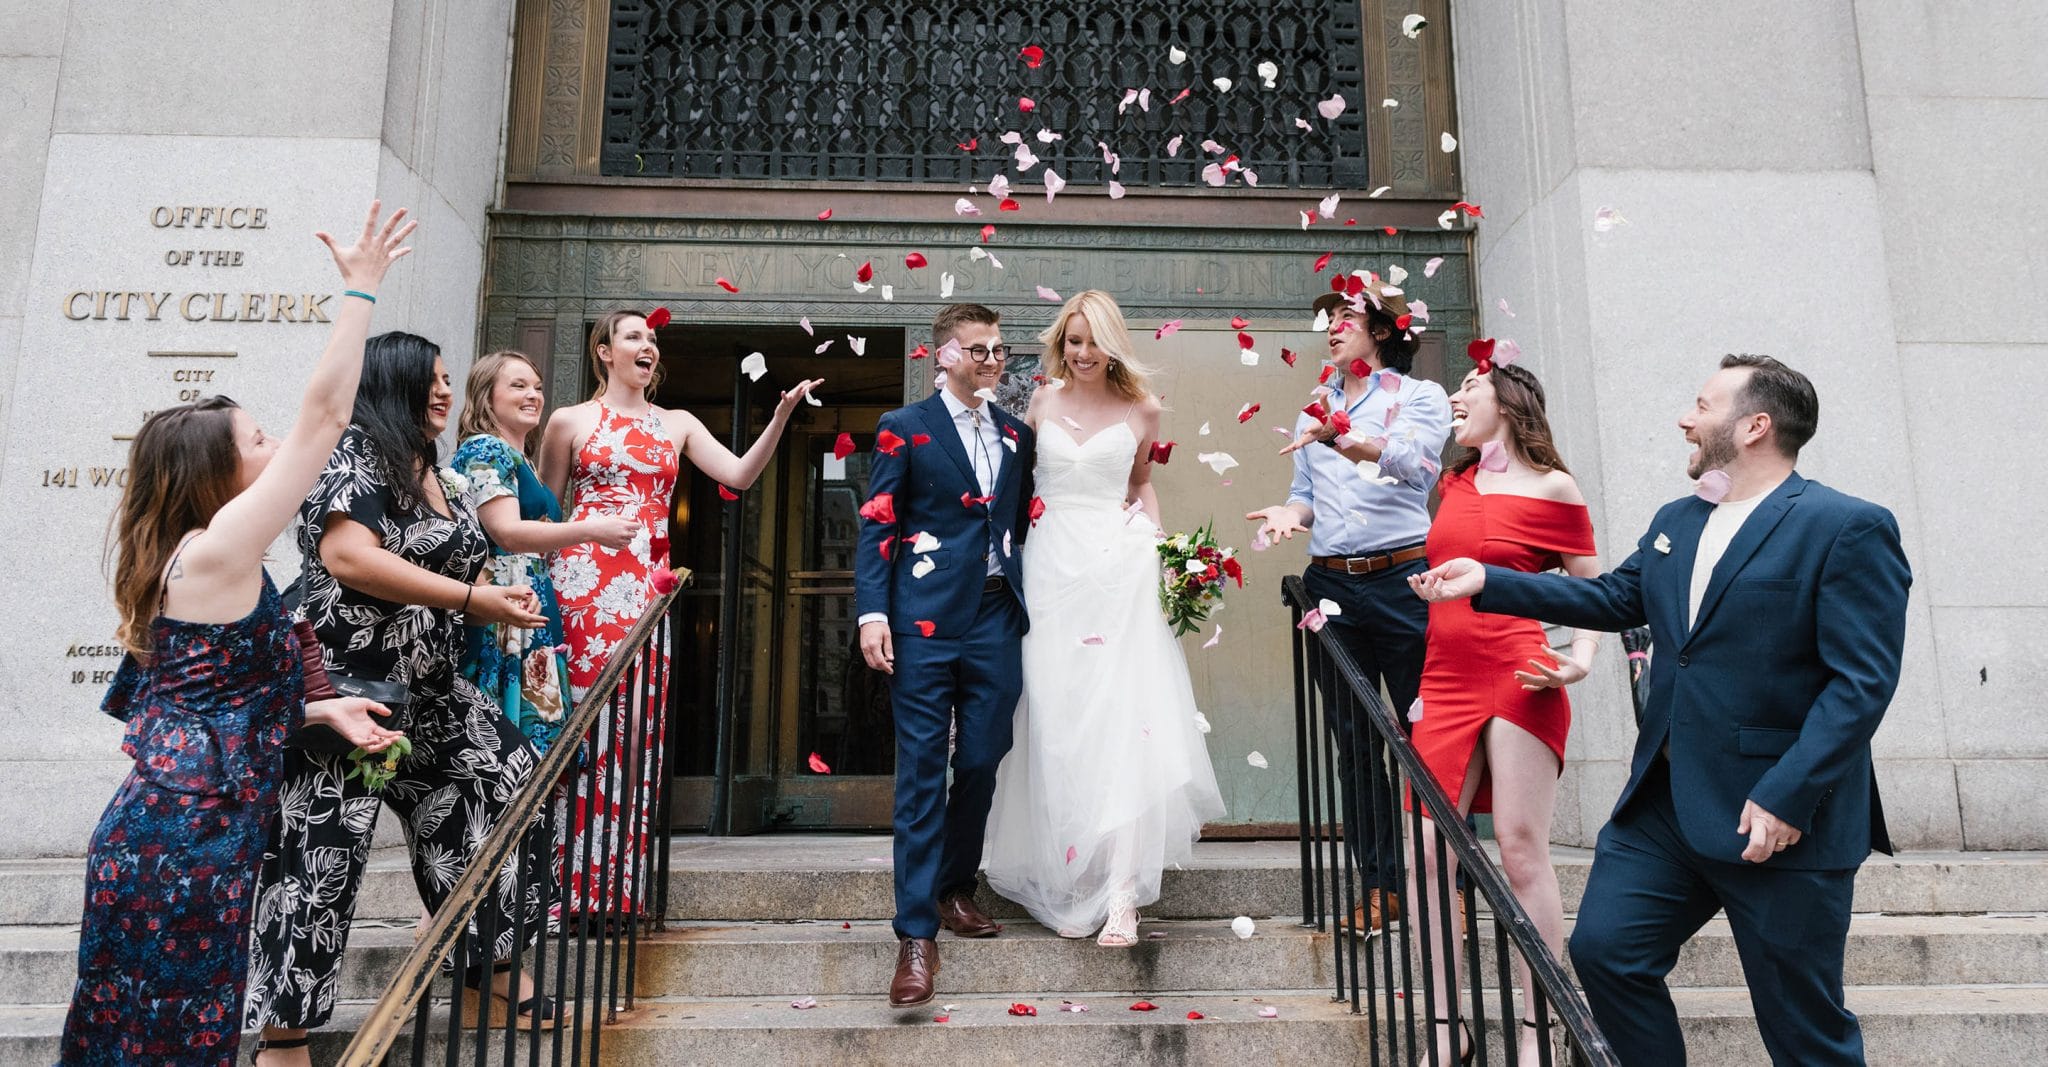 Getting Married in NYC How & Where to Get a Marriage License in NYC